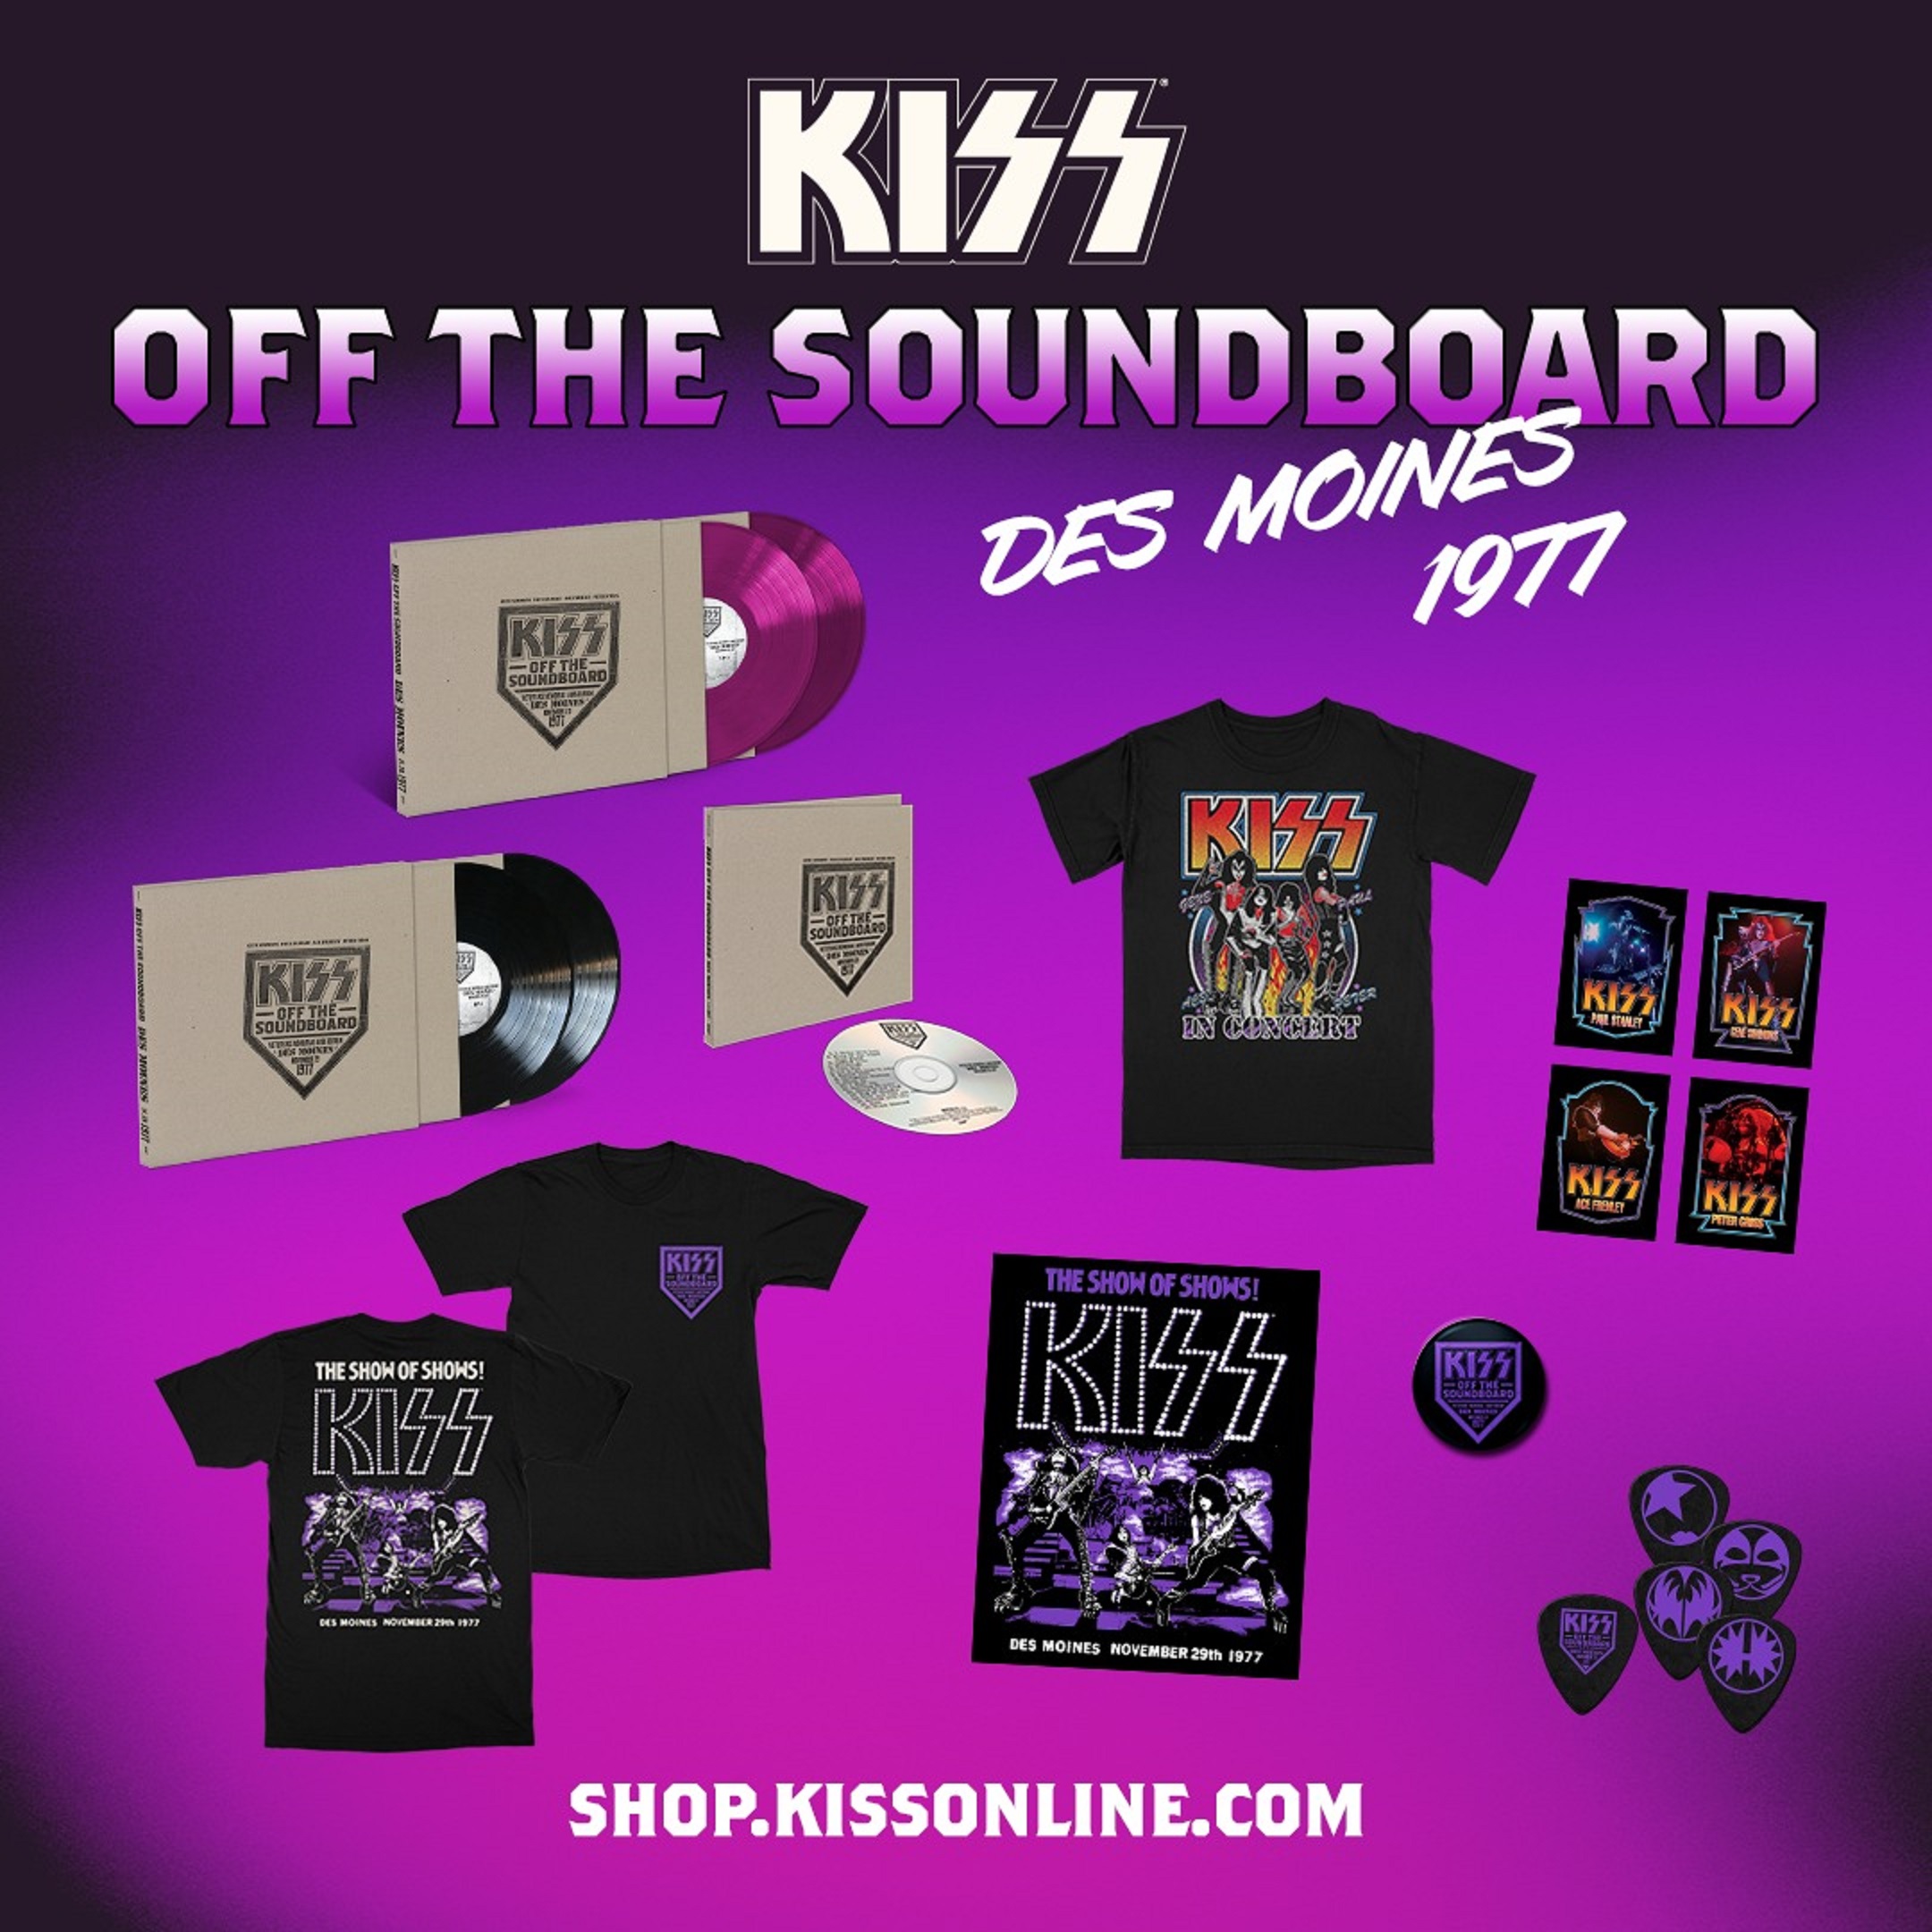 Multi-Platinum Icons KISS Release New Archival Title With ‘KISS – OFF THE SOUNDBOARD: LIVE IN DES MOINES 1977’